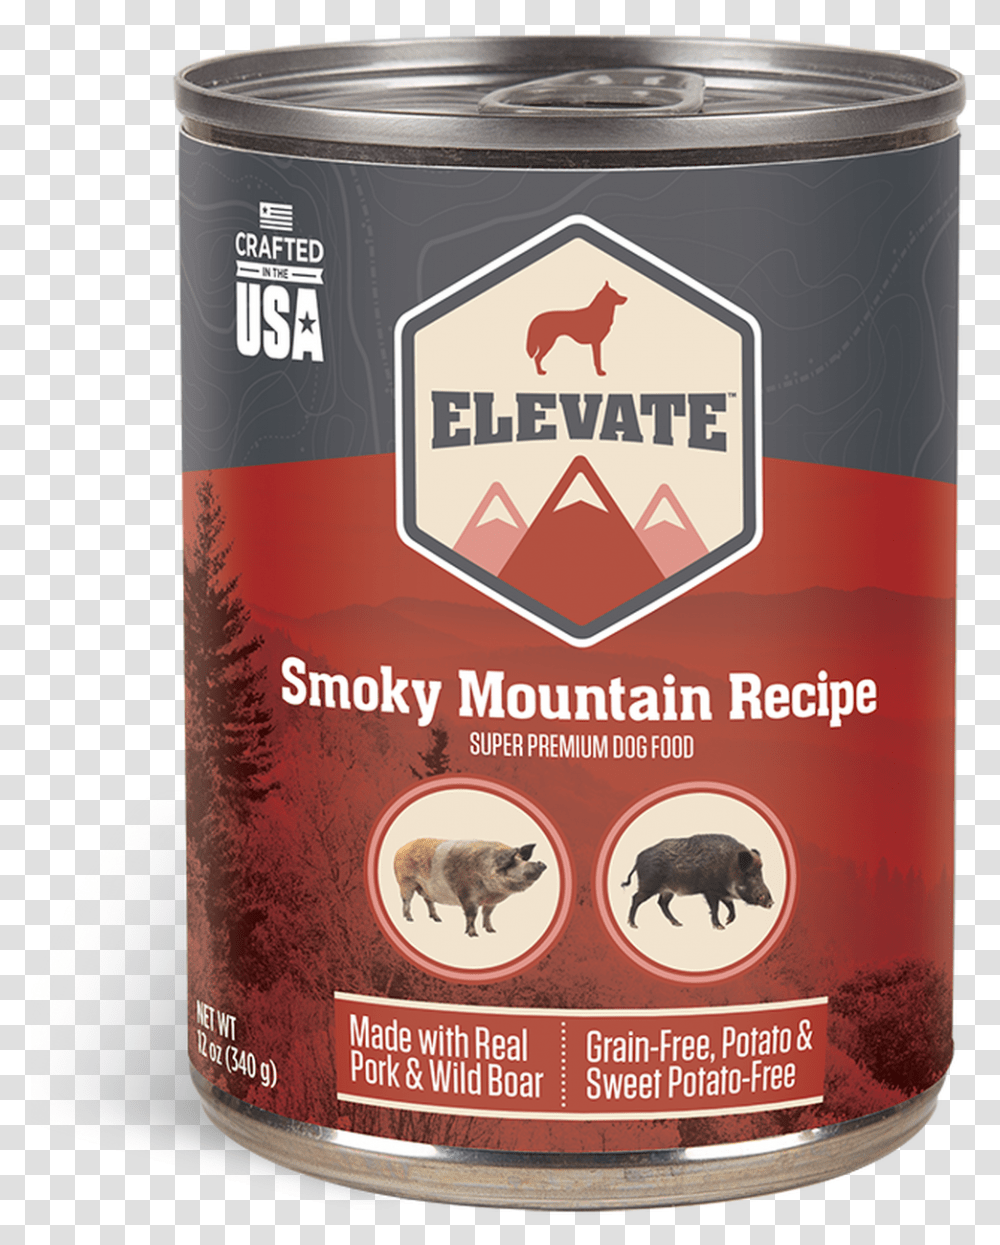 Elevate Dog Food Smoky, Tin, Label, Can Transparent Png